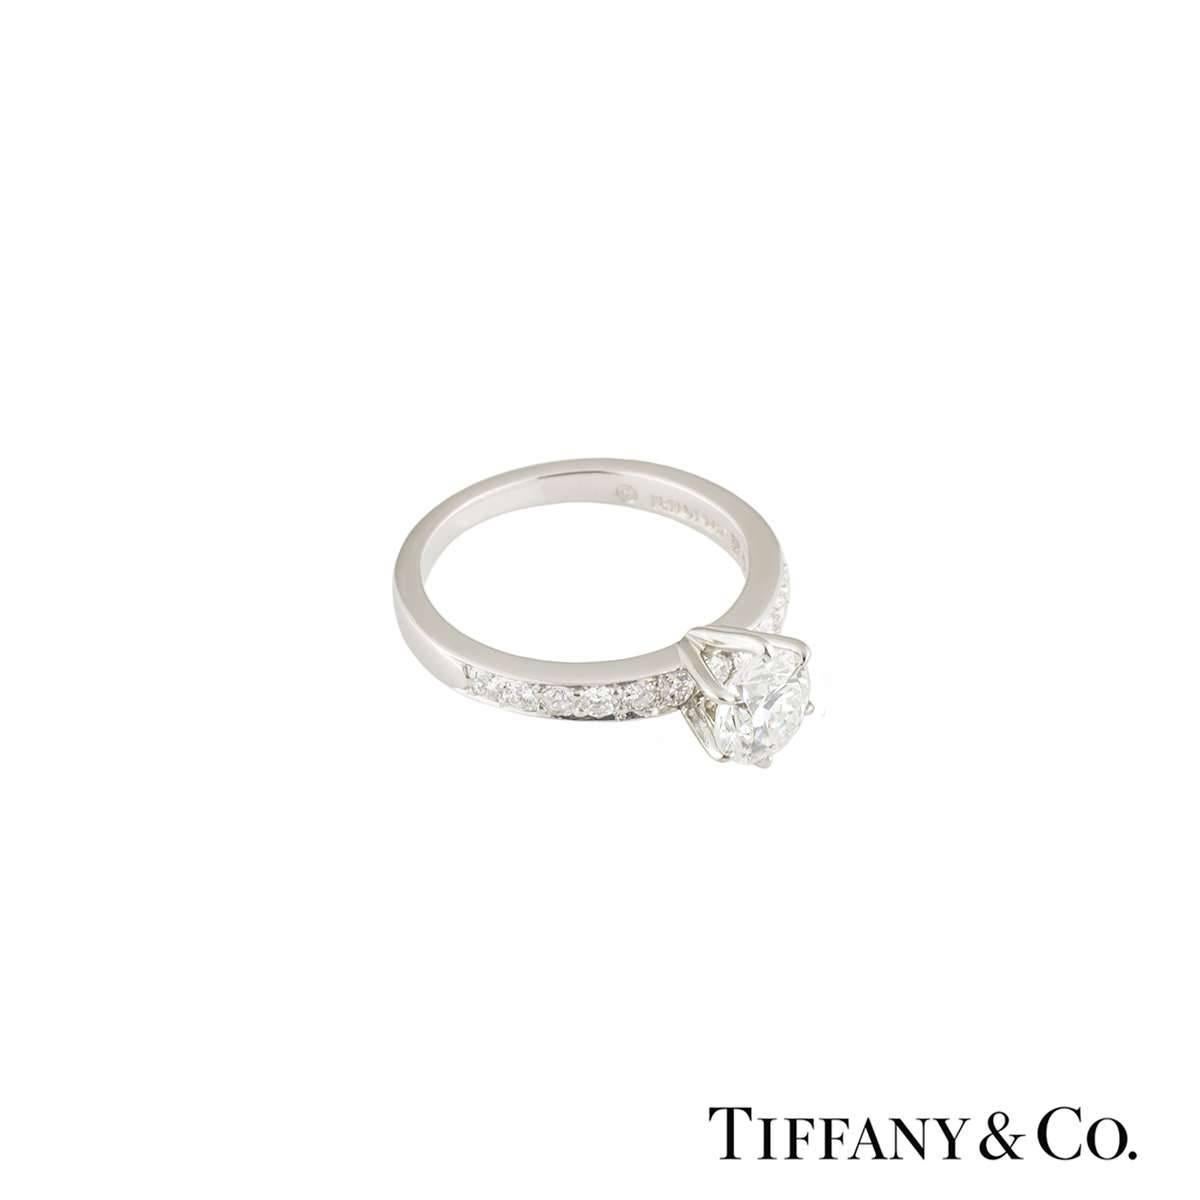 A beautiful Tiffany & Co. diamond engagement ring from The Tiffany Setting with Diamond Band collection. The ring comprises of a round brilliant cut diamonds in a prong setting with a weight of 0.75ct, F colour and VS1 clarity. The ring features